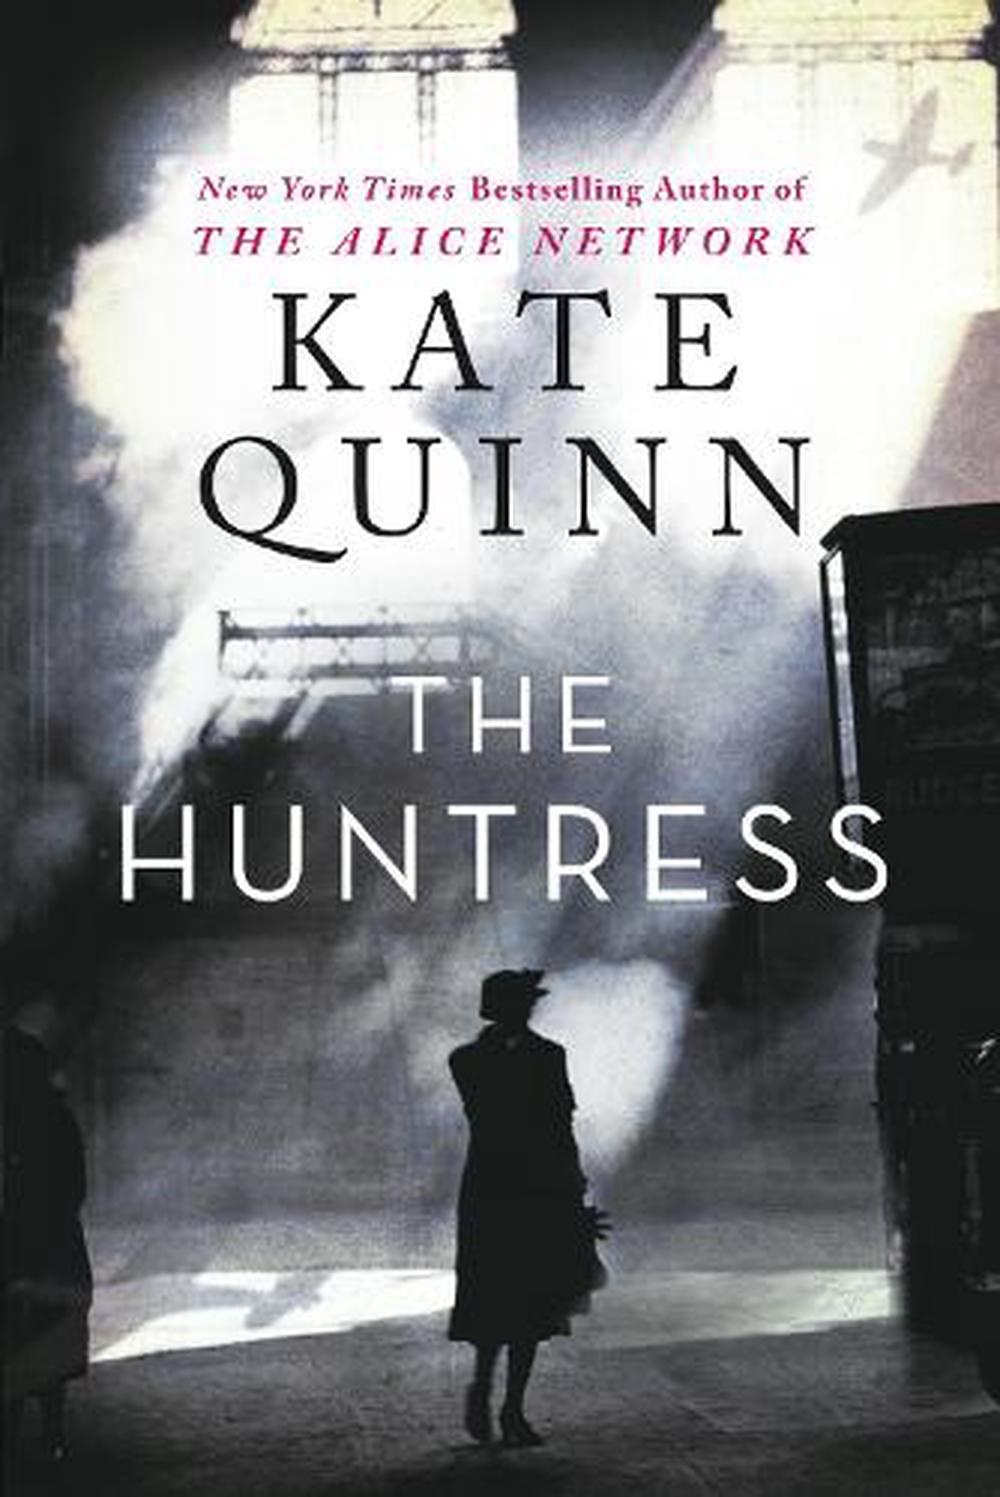 the huntress by kate quinn summary